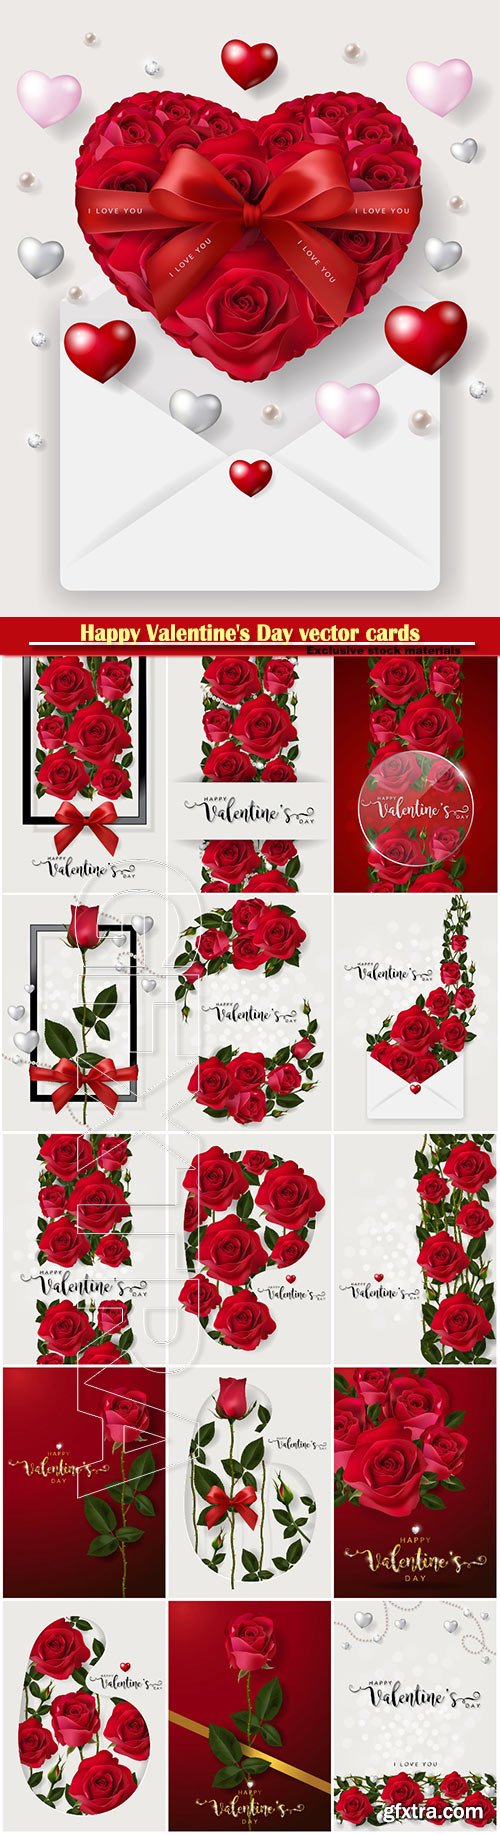 Happy Valentine\'s Day vector cards, red roses and hearts, romantic backgrounds # 3